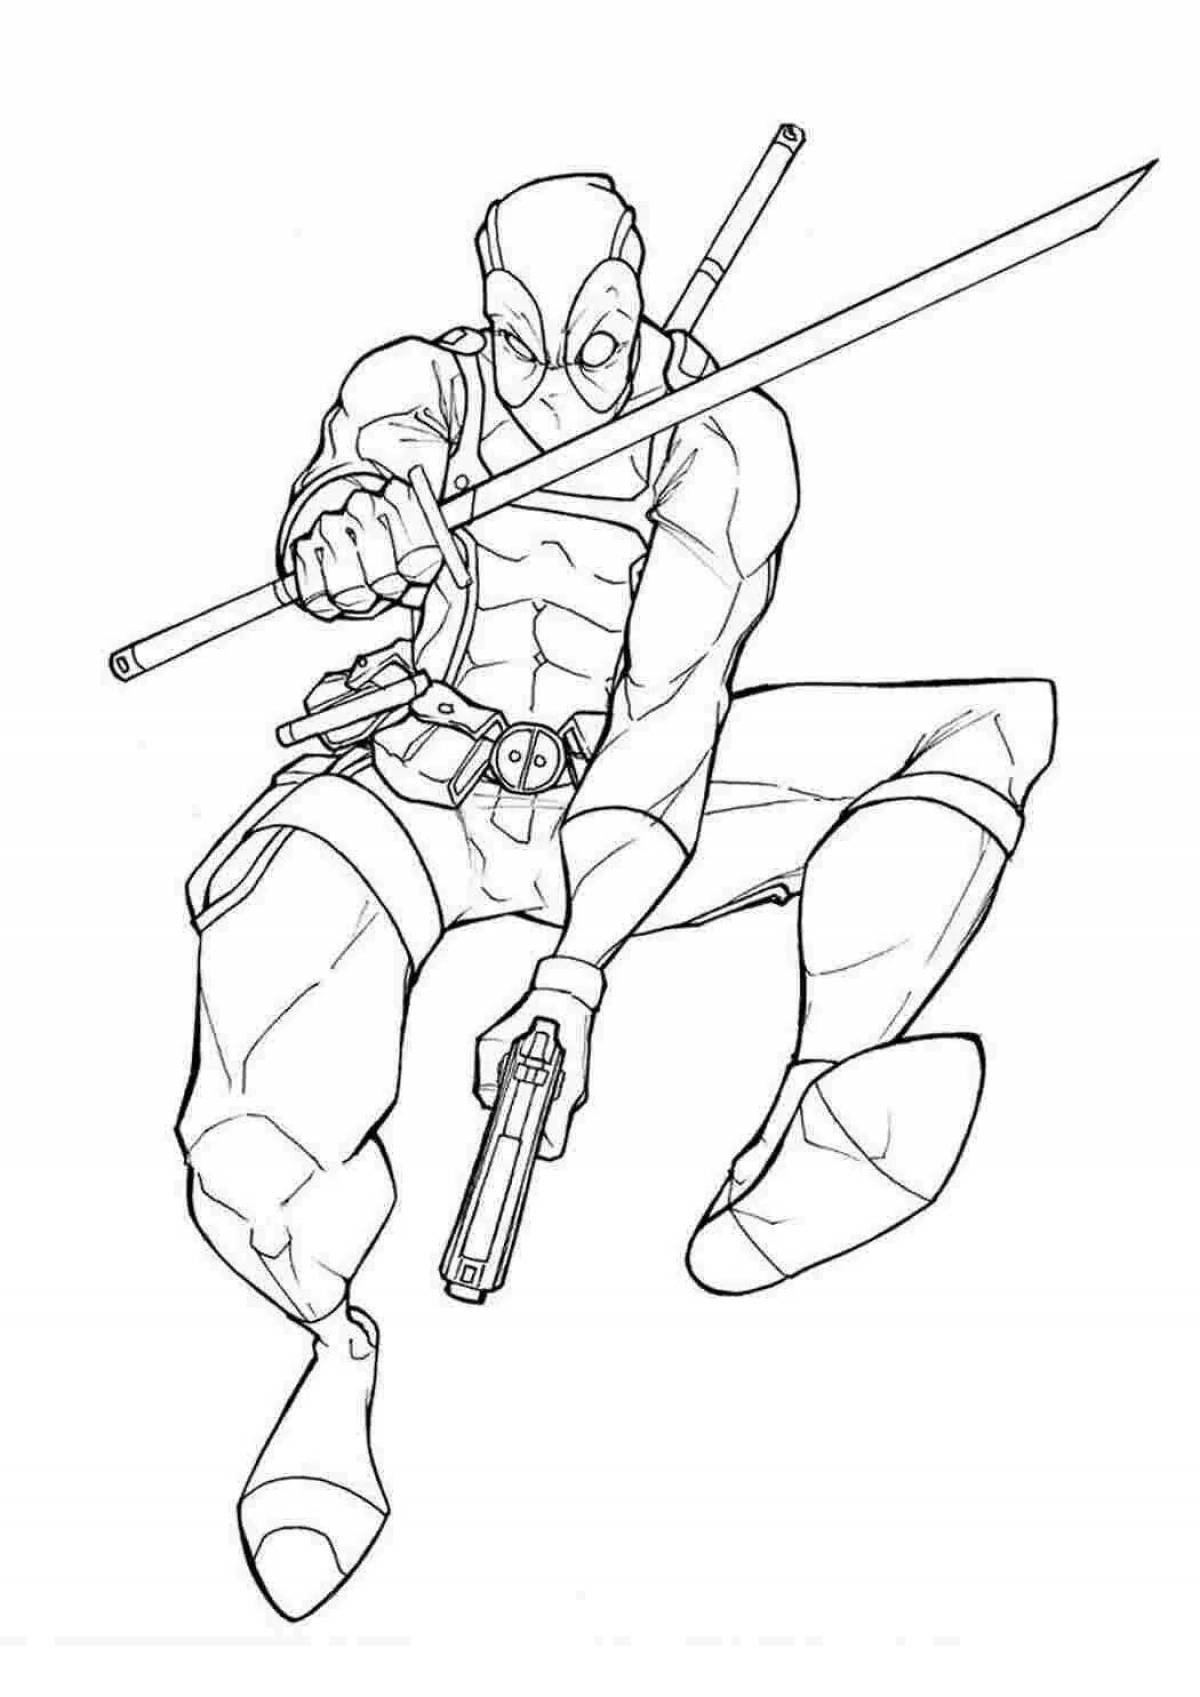 Deadpool intensive coloring for boys